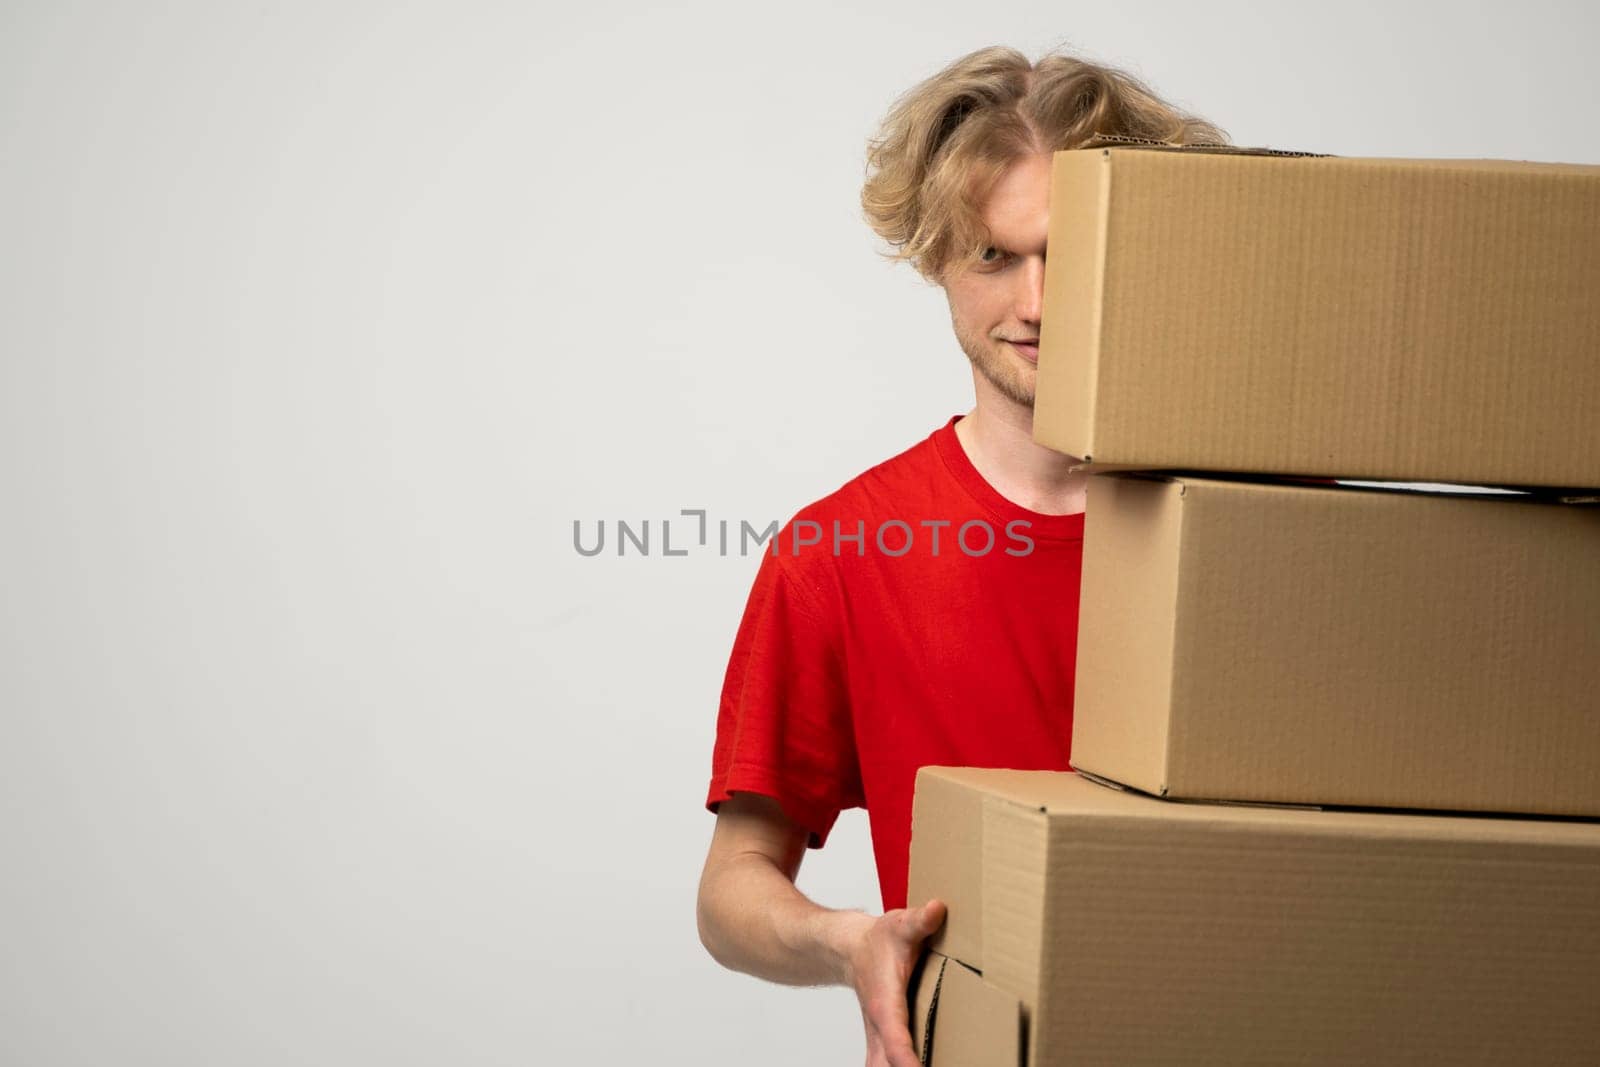 Courier in a red uniform holding a stack of cardboard boxes. Delivery man delivering postal packages over white studio background